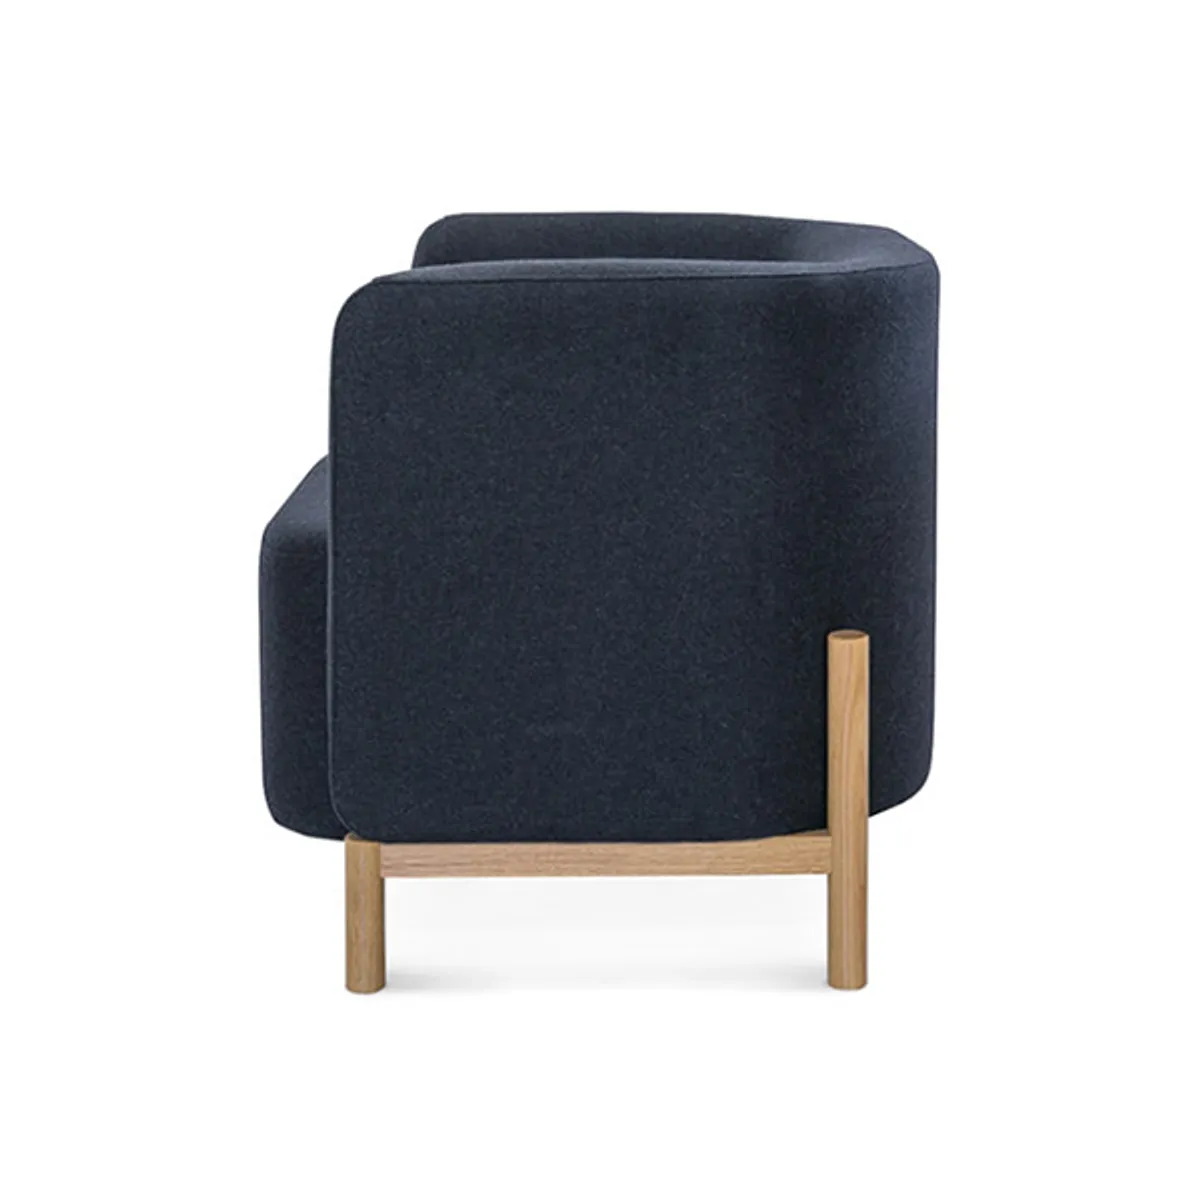 Roberta Lounge Chair Upholstered Hotel Furniture With Wooden Legs Insideoutcontracts 022